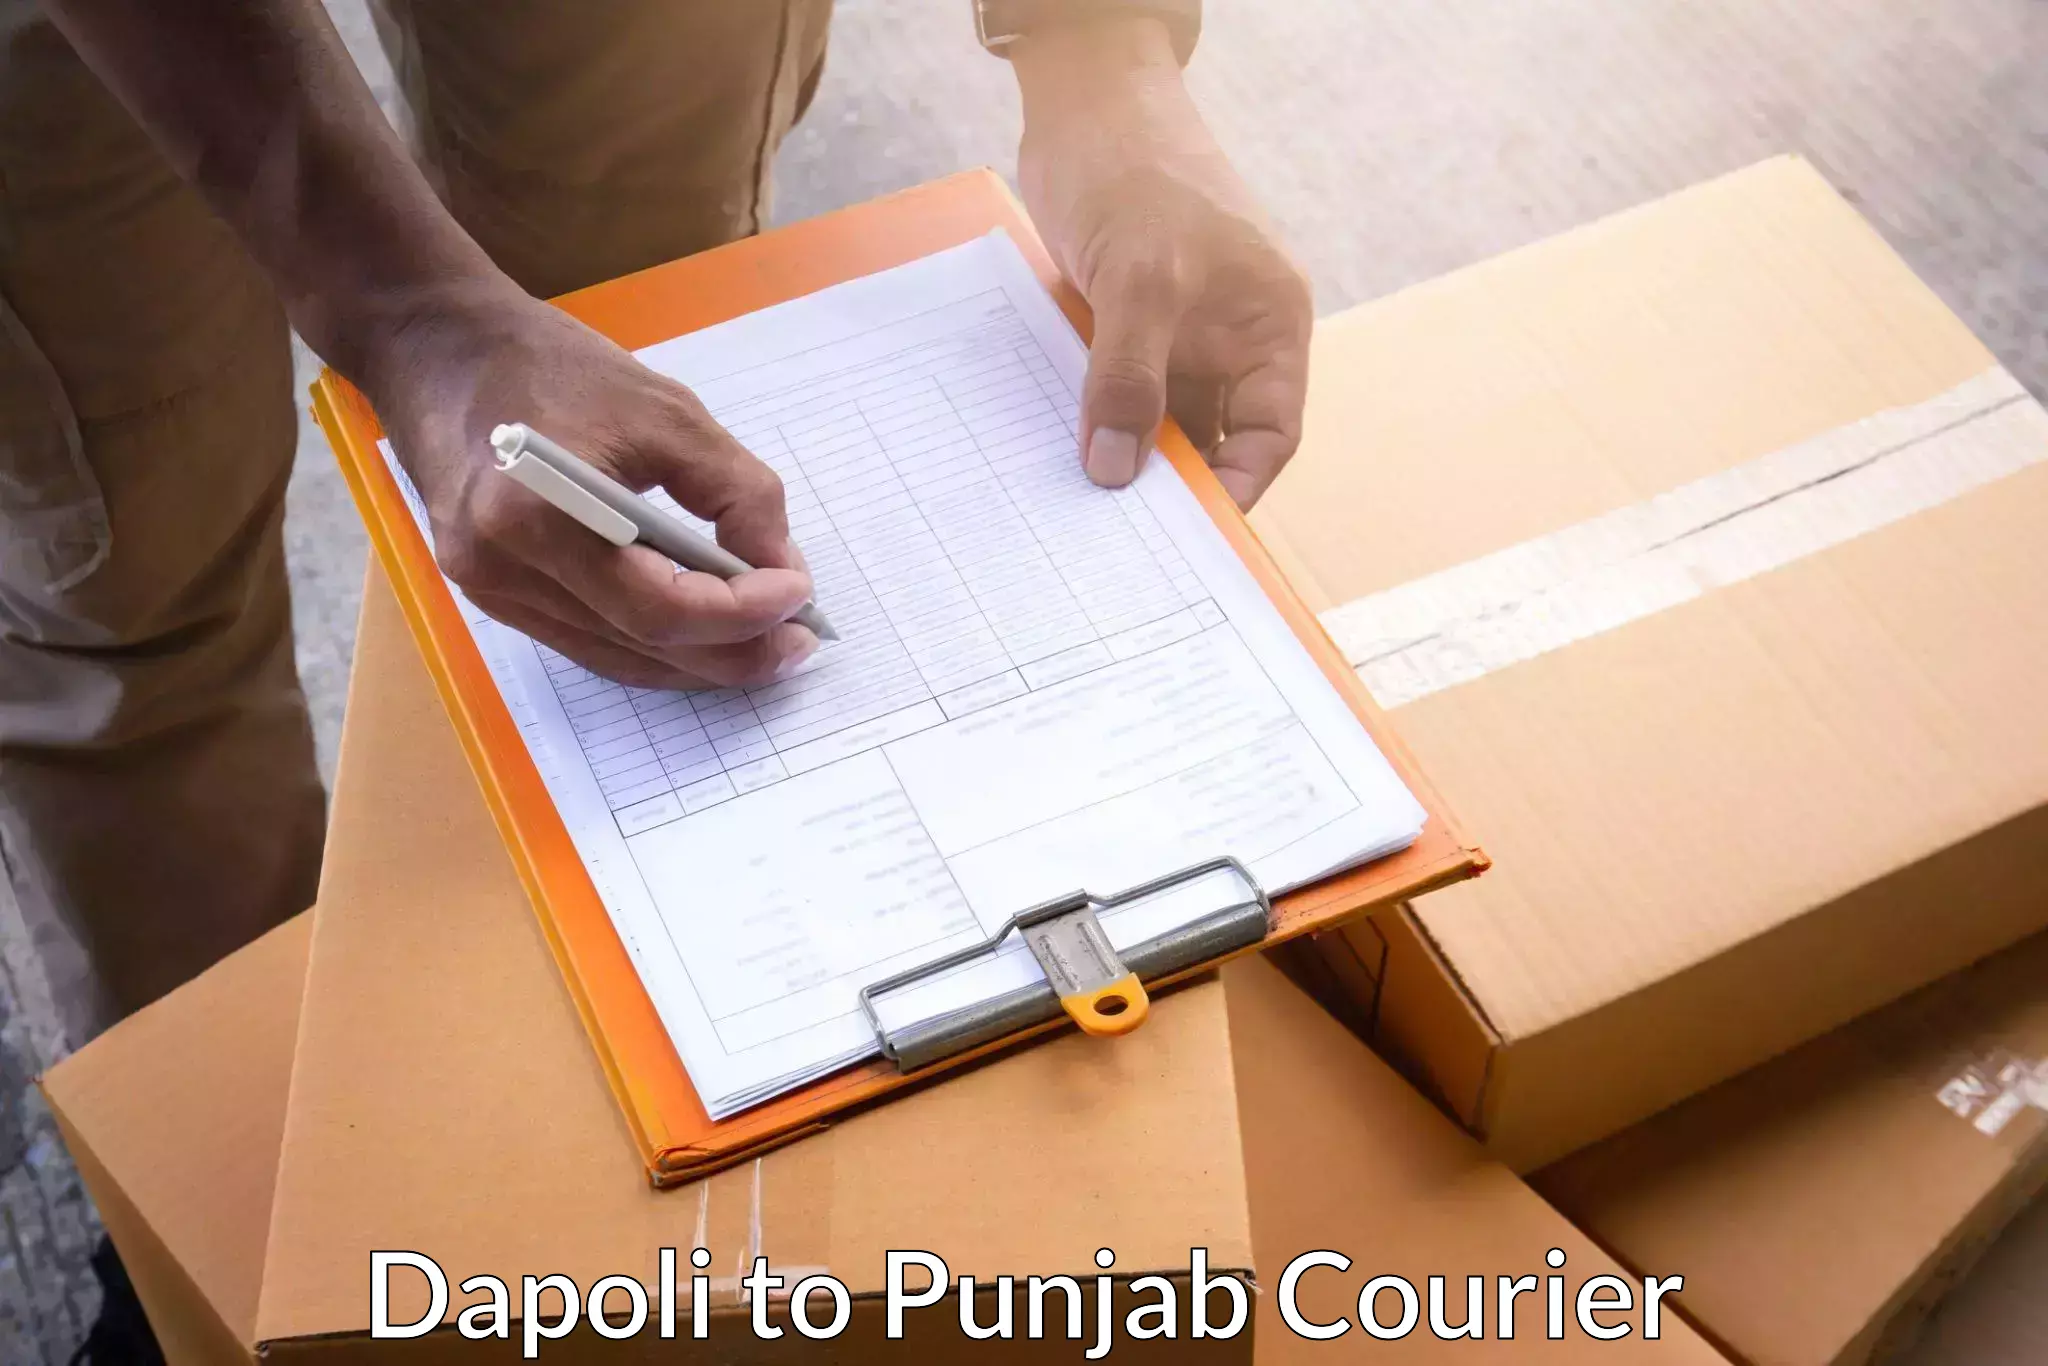 Package delivery network Dapoli to Khanna